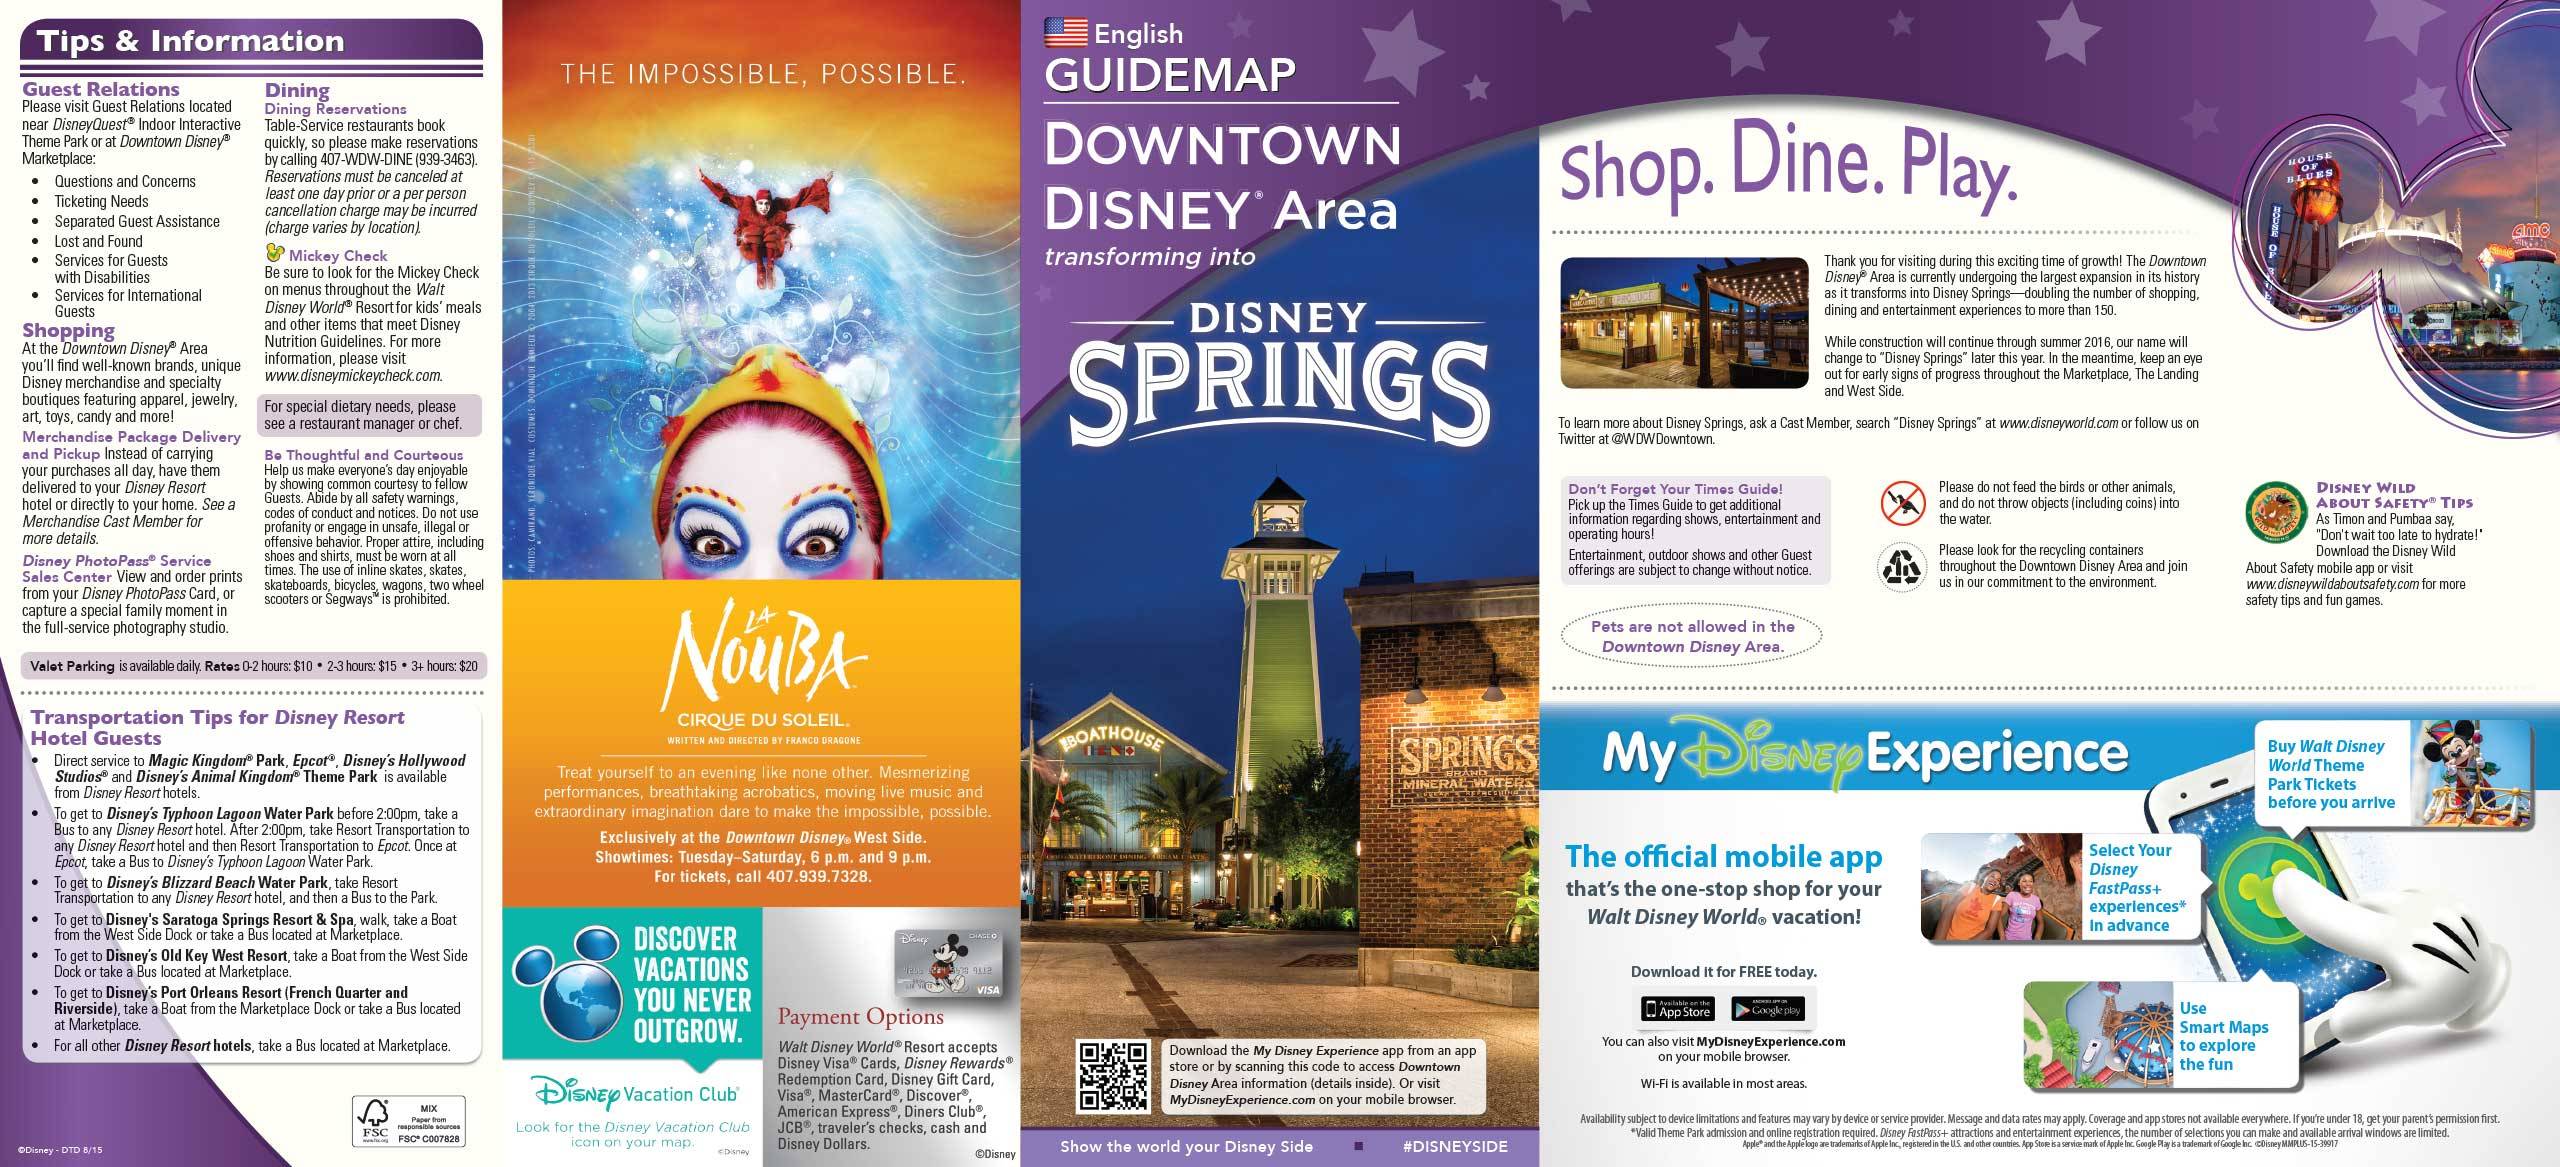 Disney Springs on the front cover of Downtown Disney Guide Map